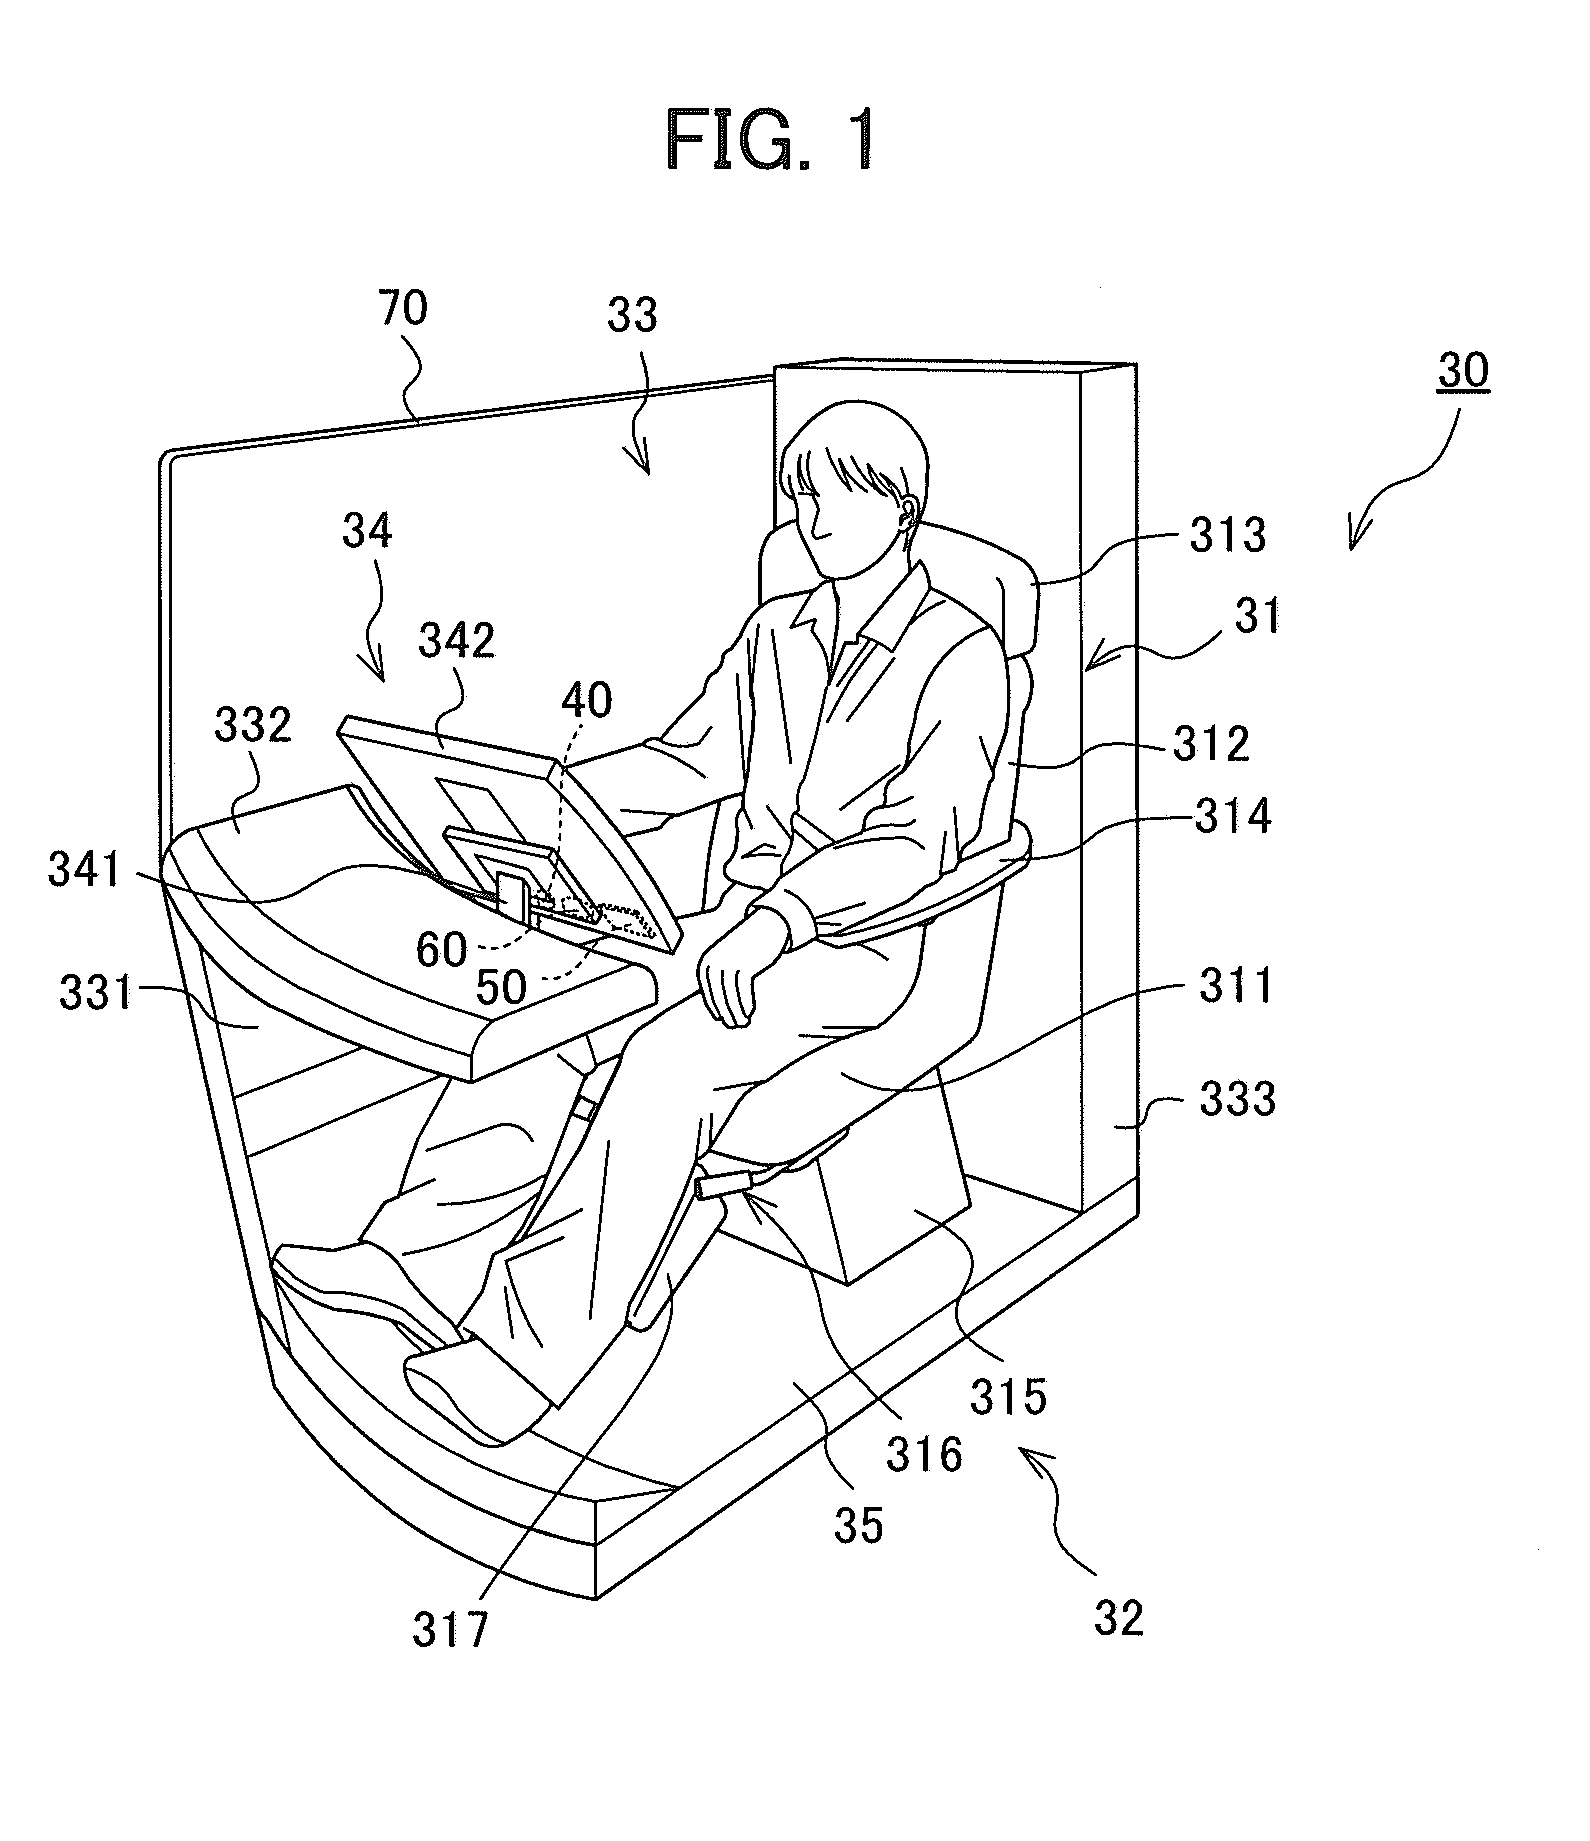 Multiplayer participation type gaming system having walls for limiting dialogue voices outputted from gaming machine